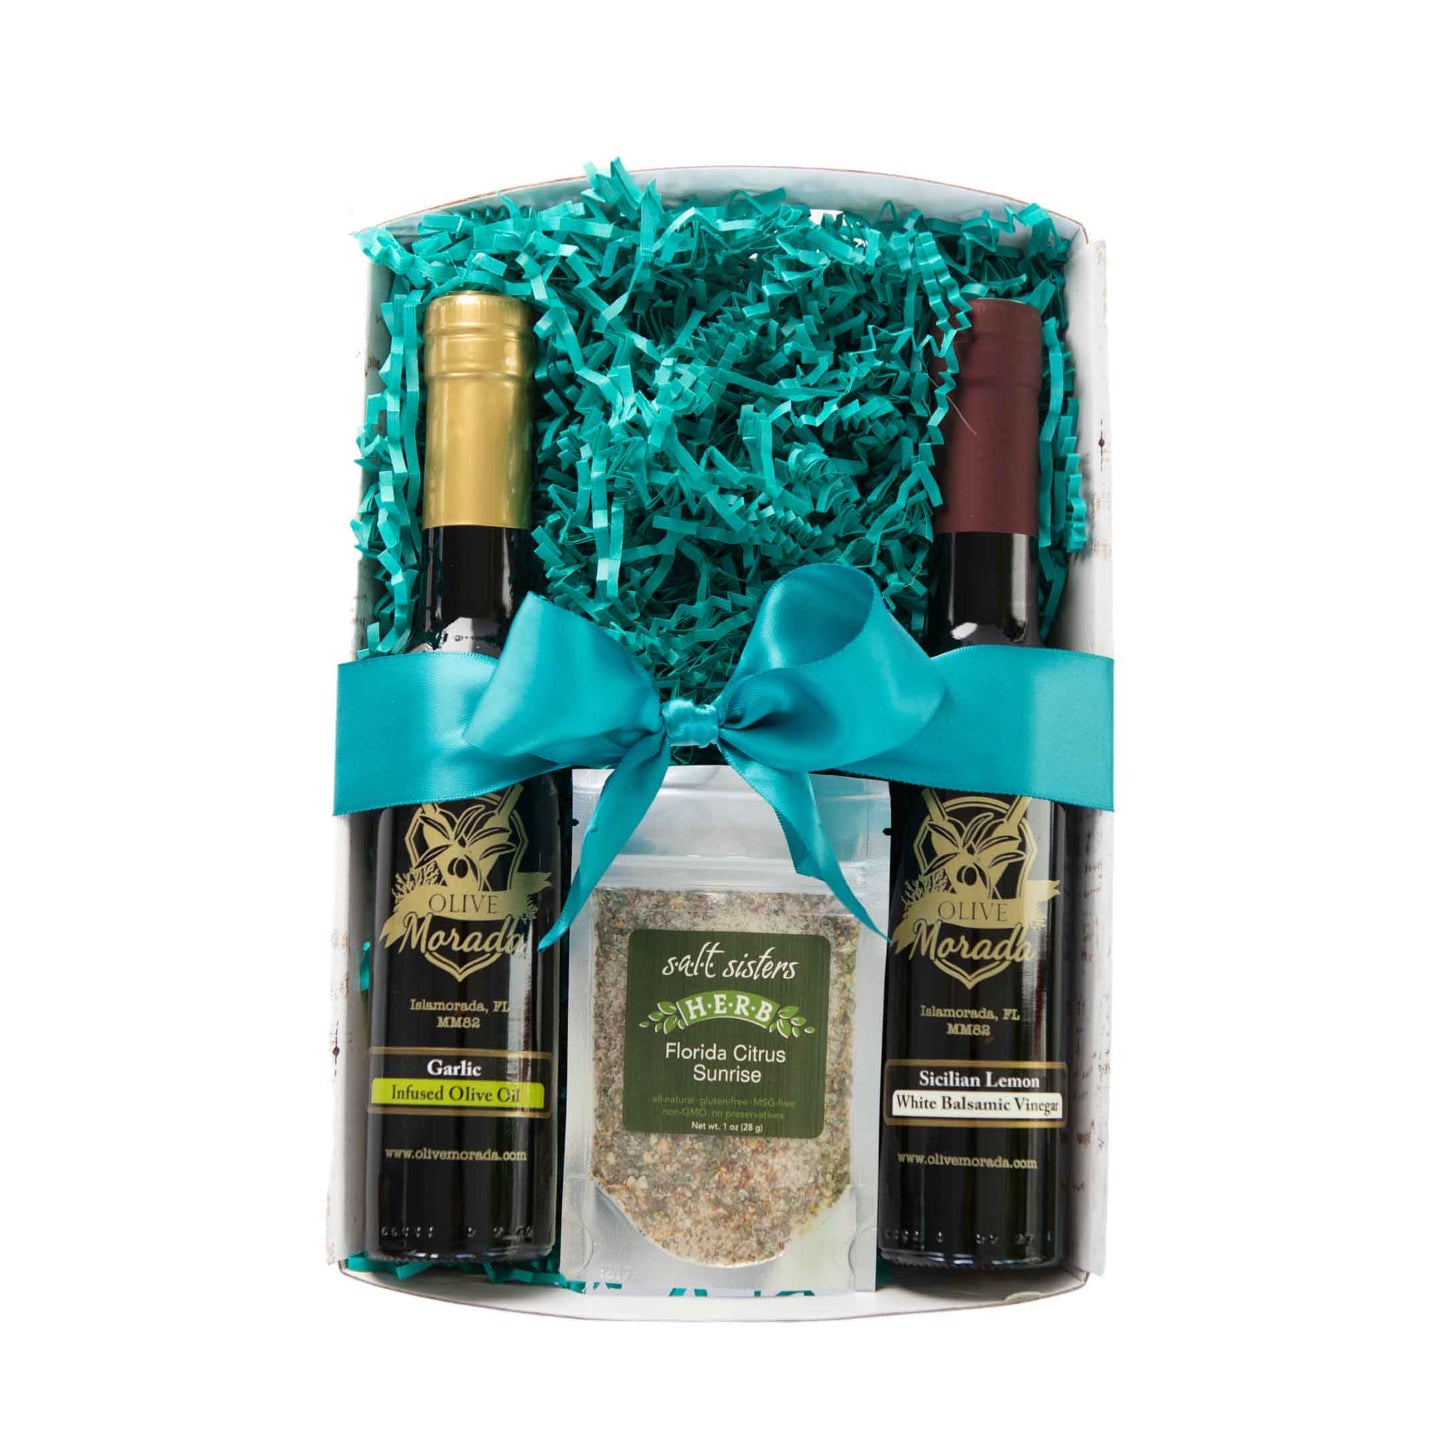 A Perfect Pair Gift Basket